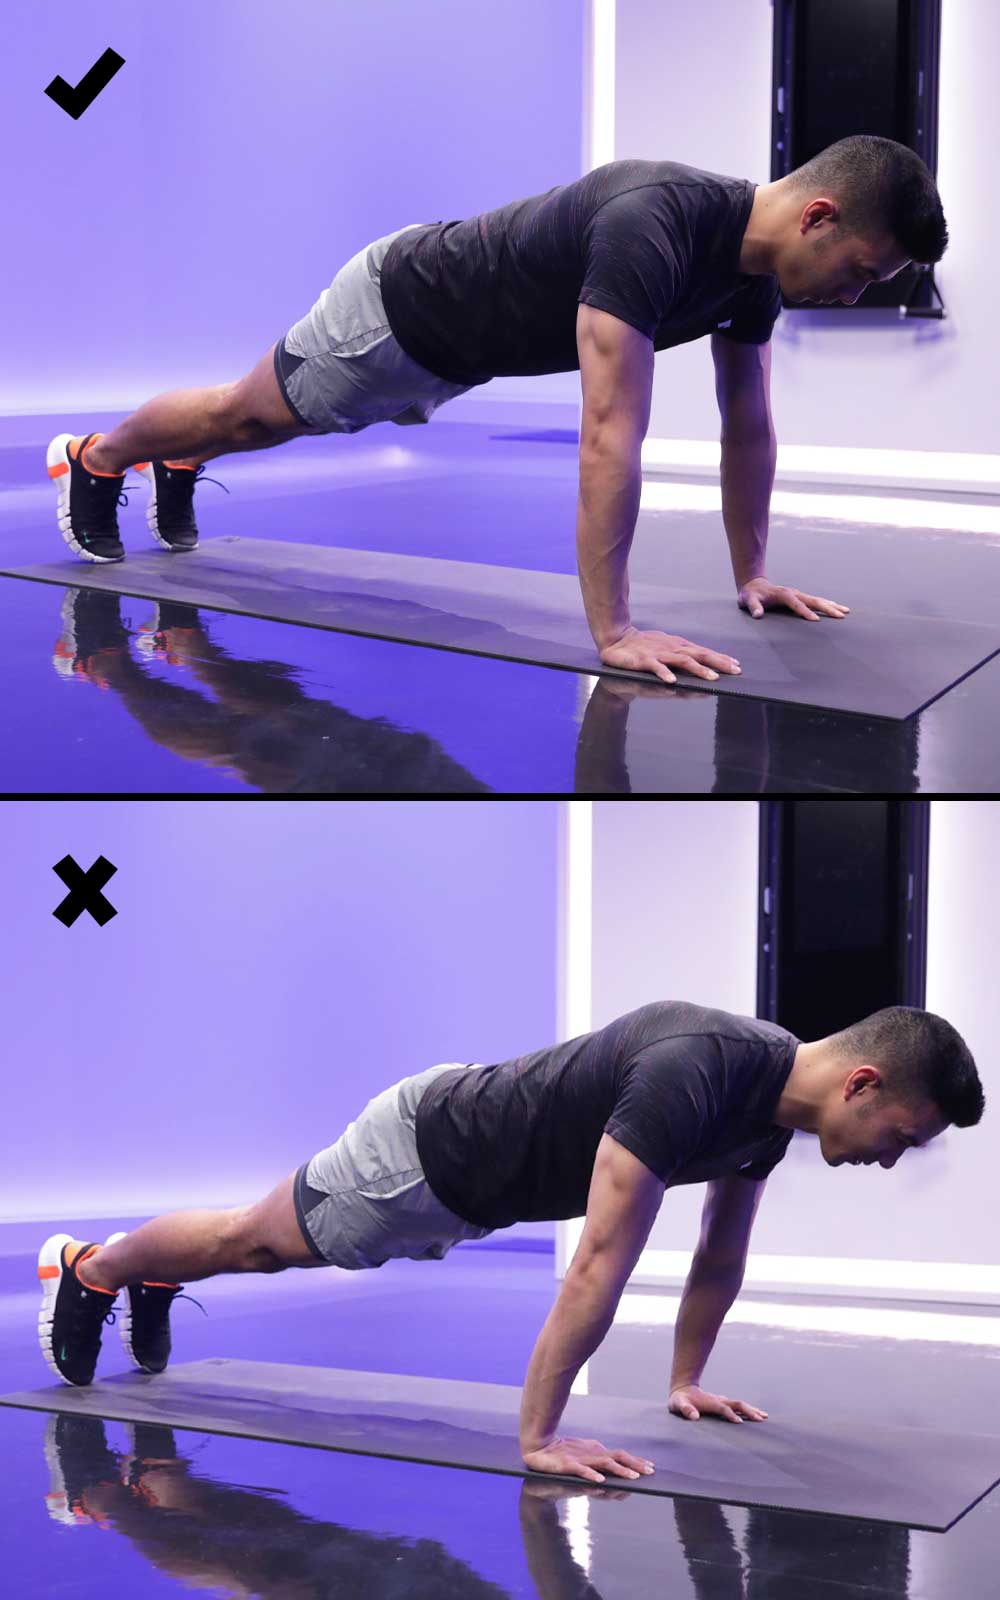 Tonal coach Tim Landicho demonstrating correct pushup form (hands directly under shoulders) and incorrect form (hands behind shoulders) to improve wrist pain during pushups.